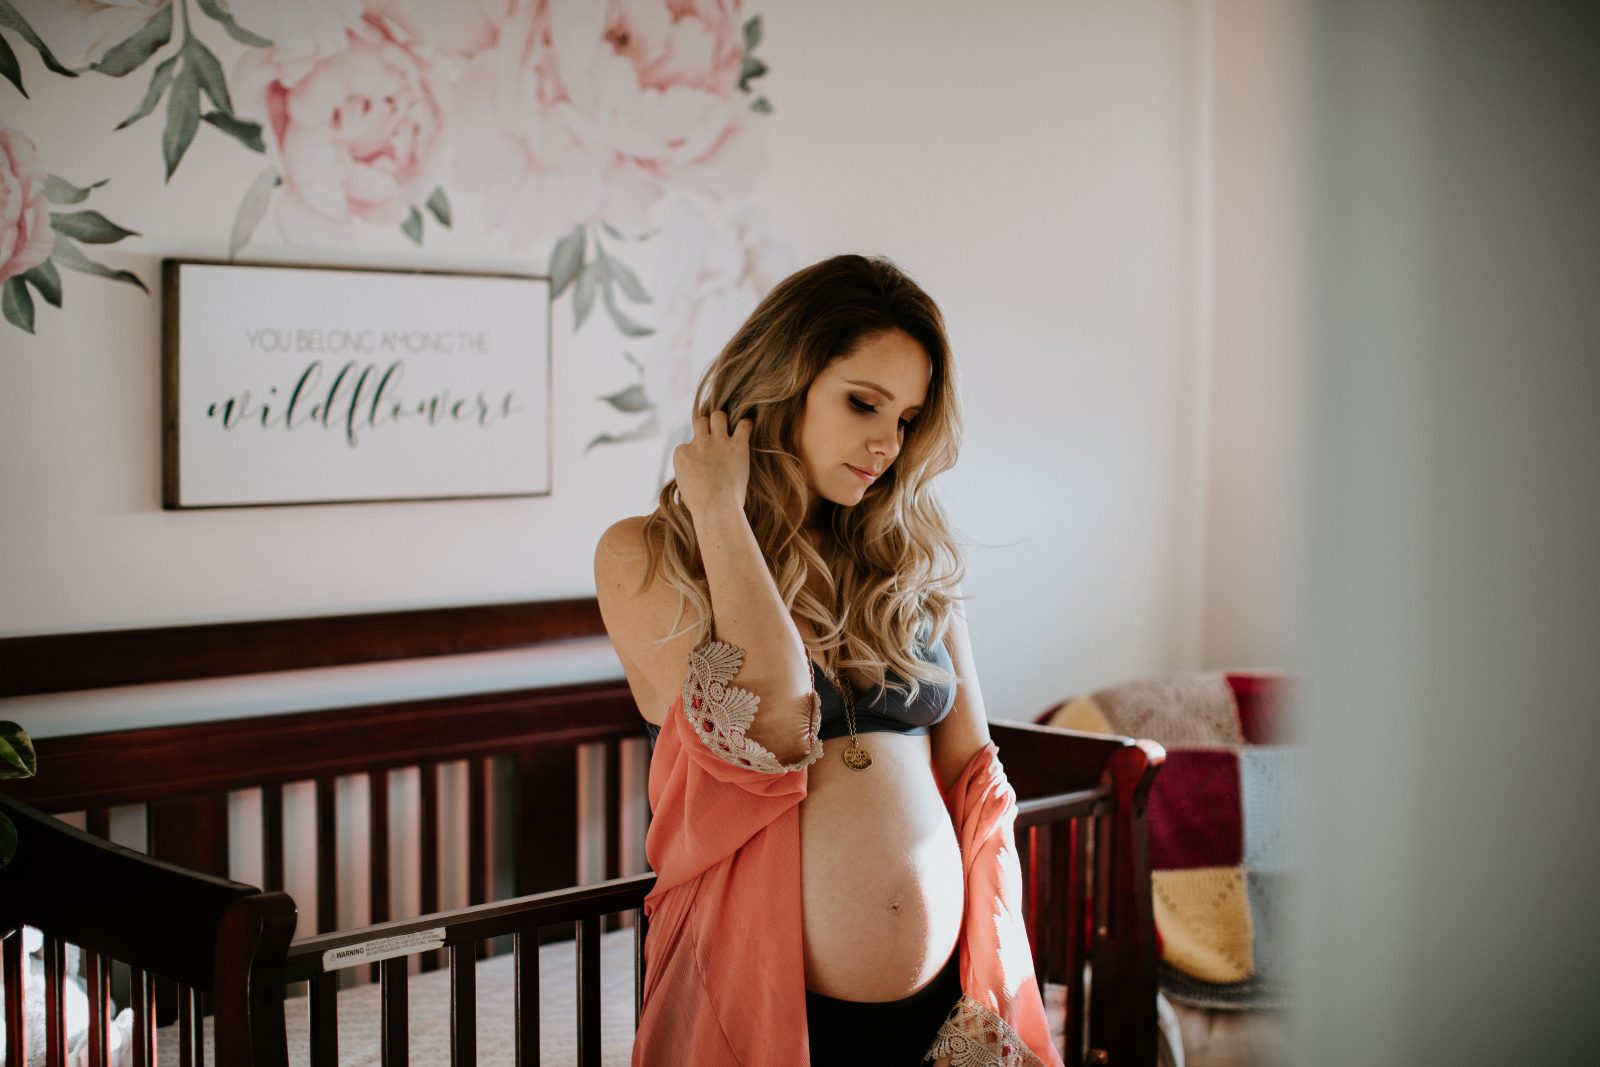 edmonton maternity photographer in home maternity session with cute couple